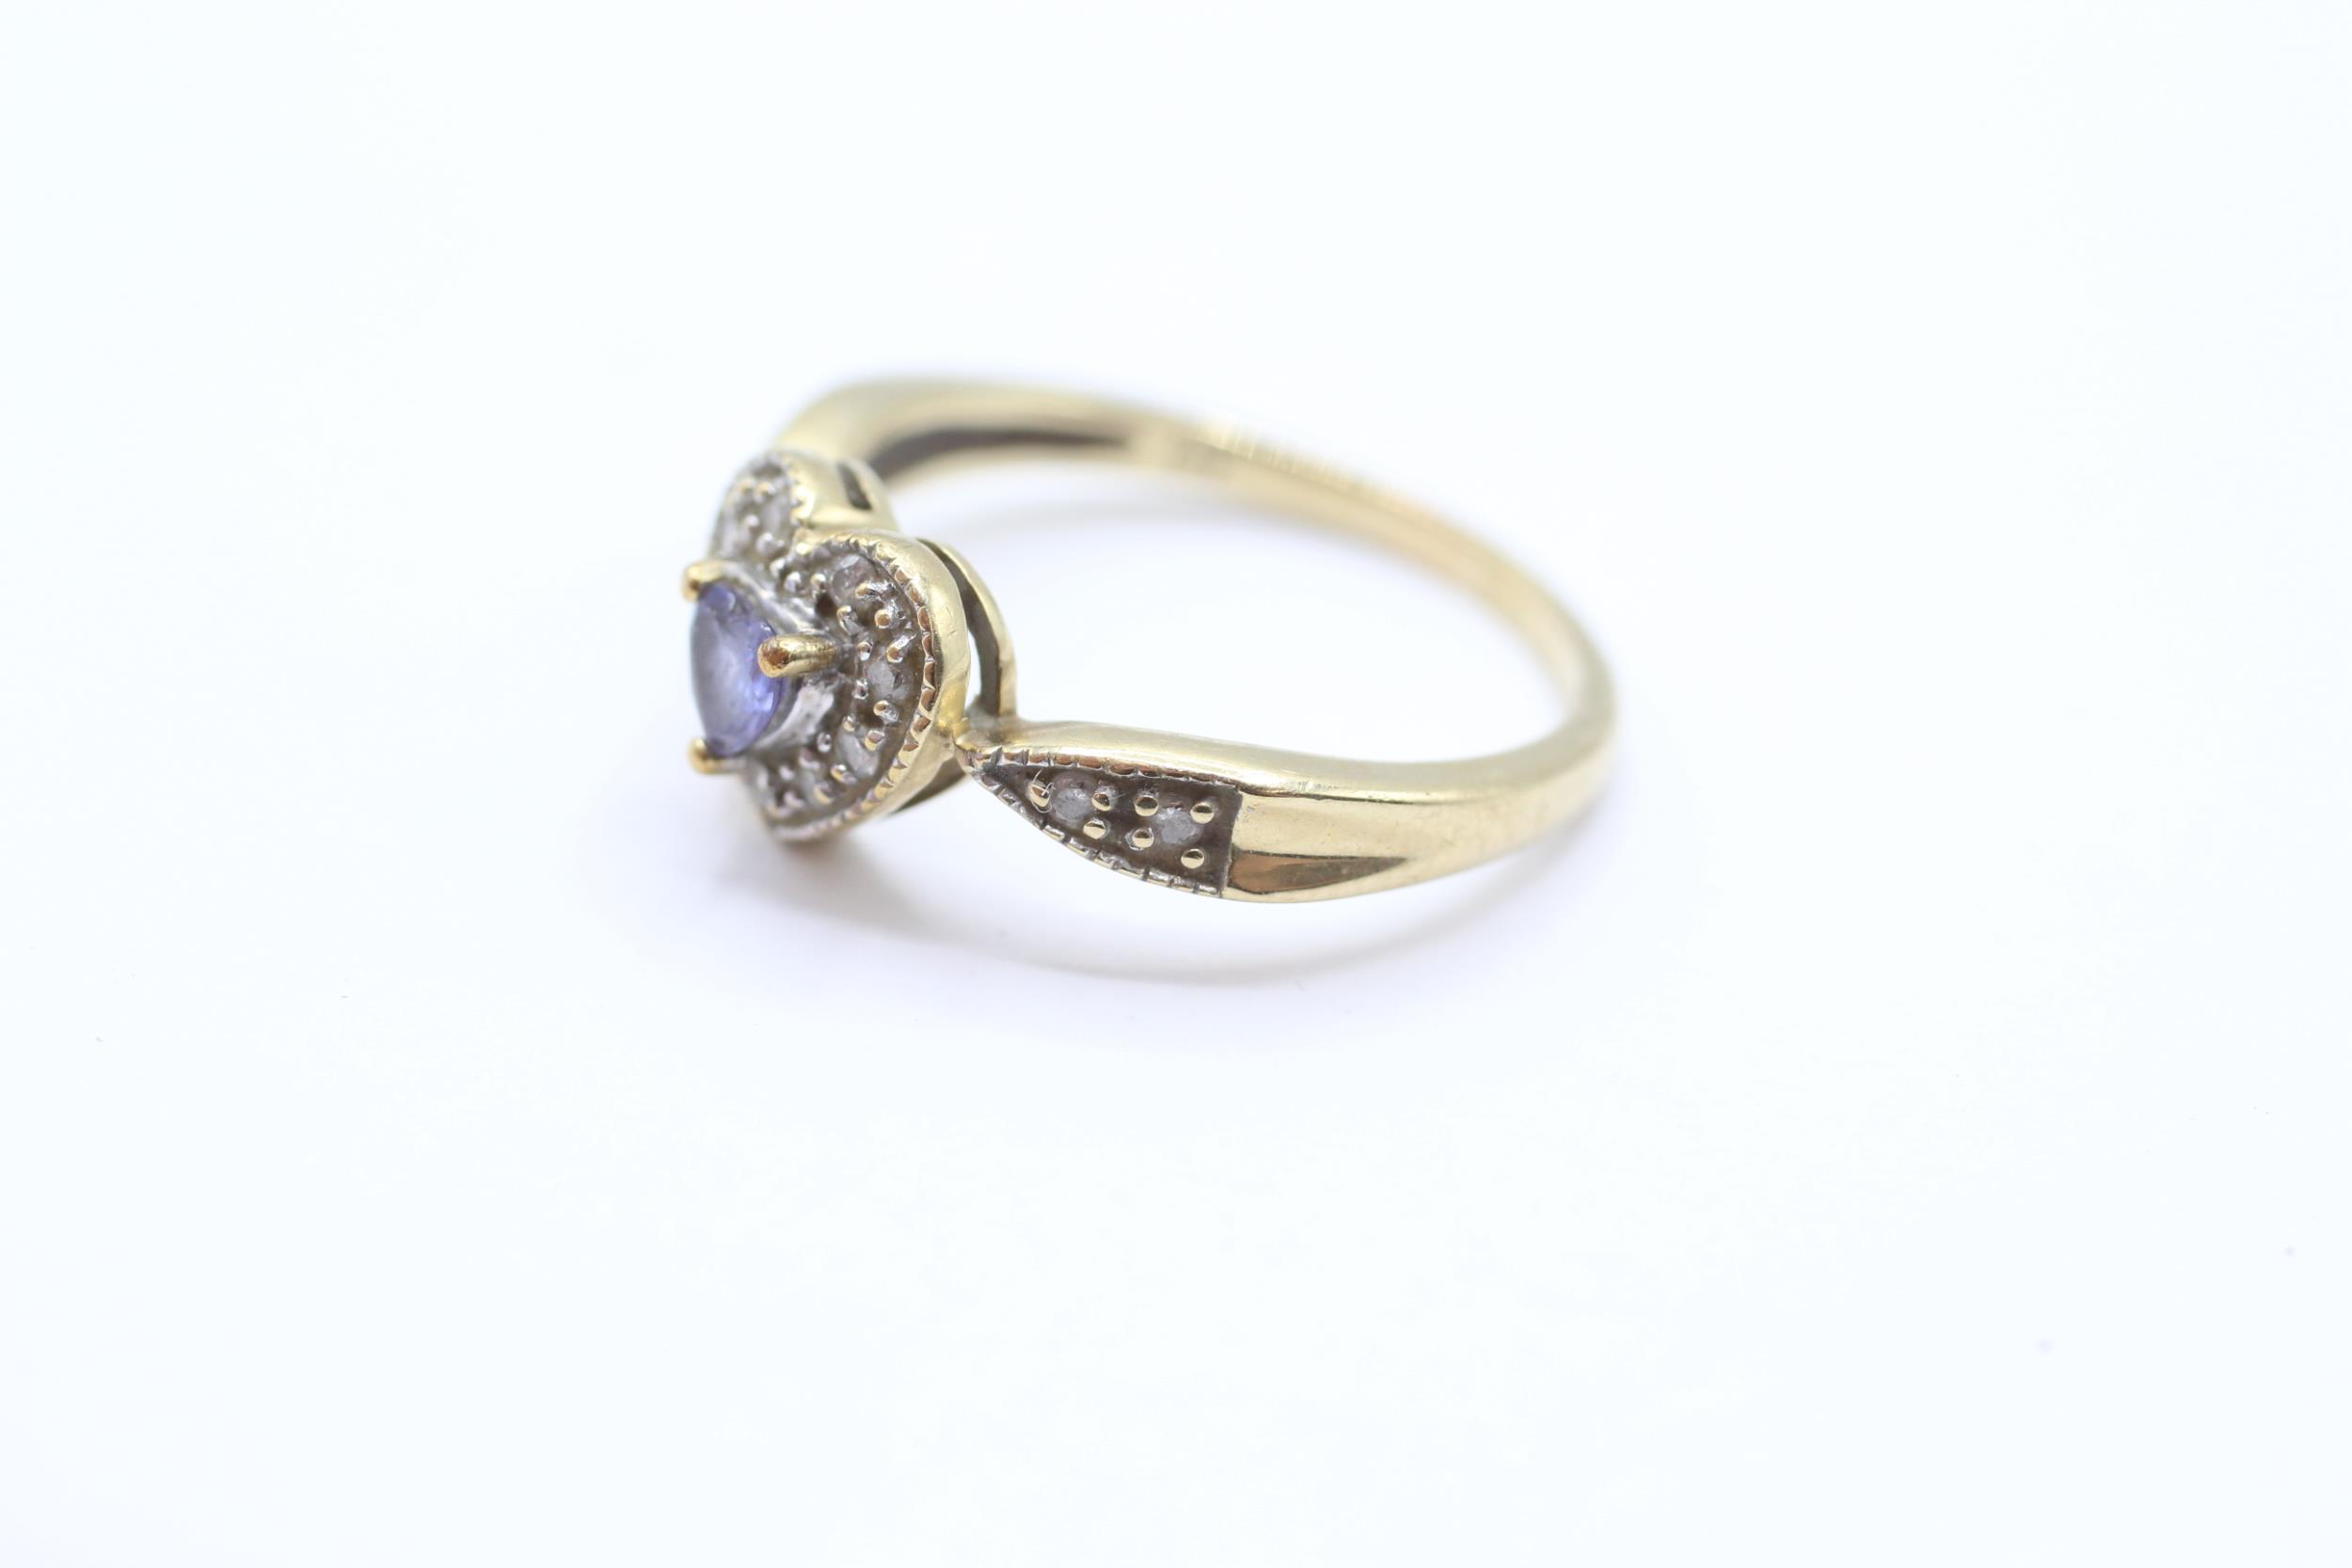 9ct gold diamond and tanzanite heart halo ring Size Q - 2.9 g - Image 3 of 4